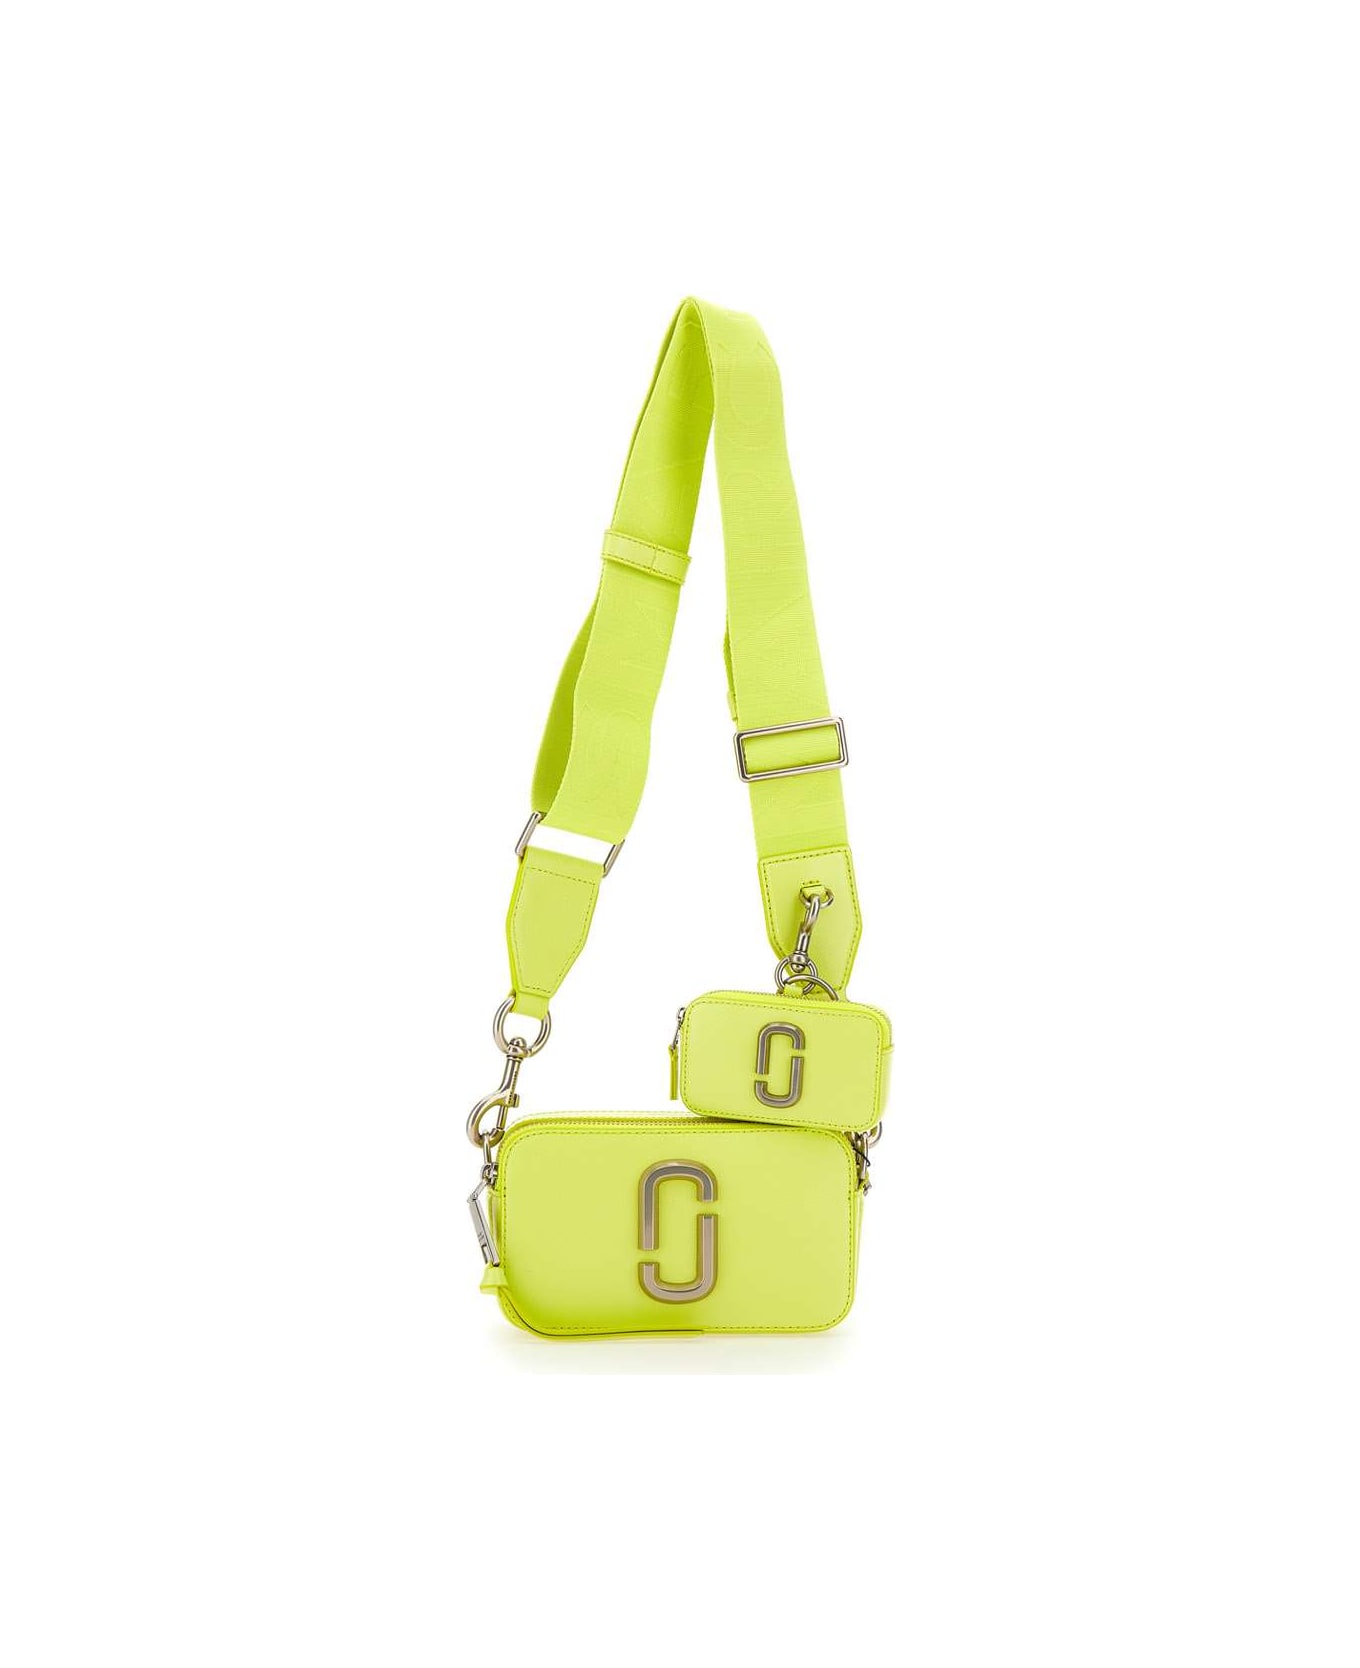 Marc Jacobs "the Utility Snapshot" Leather Bag - YELLOW